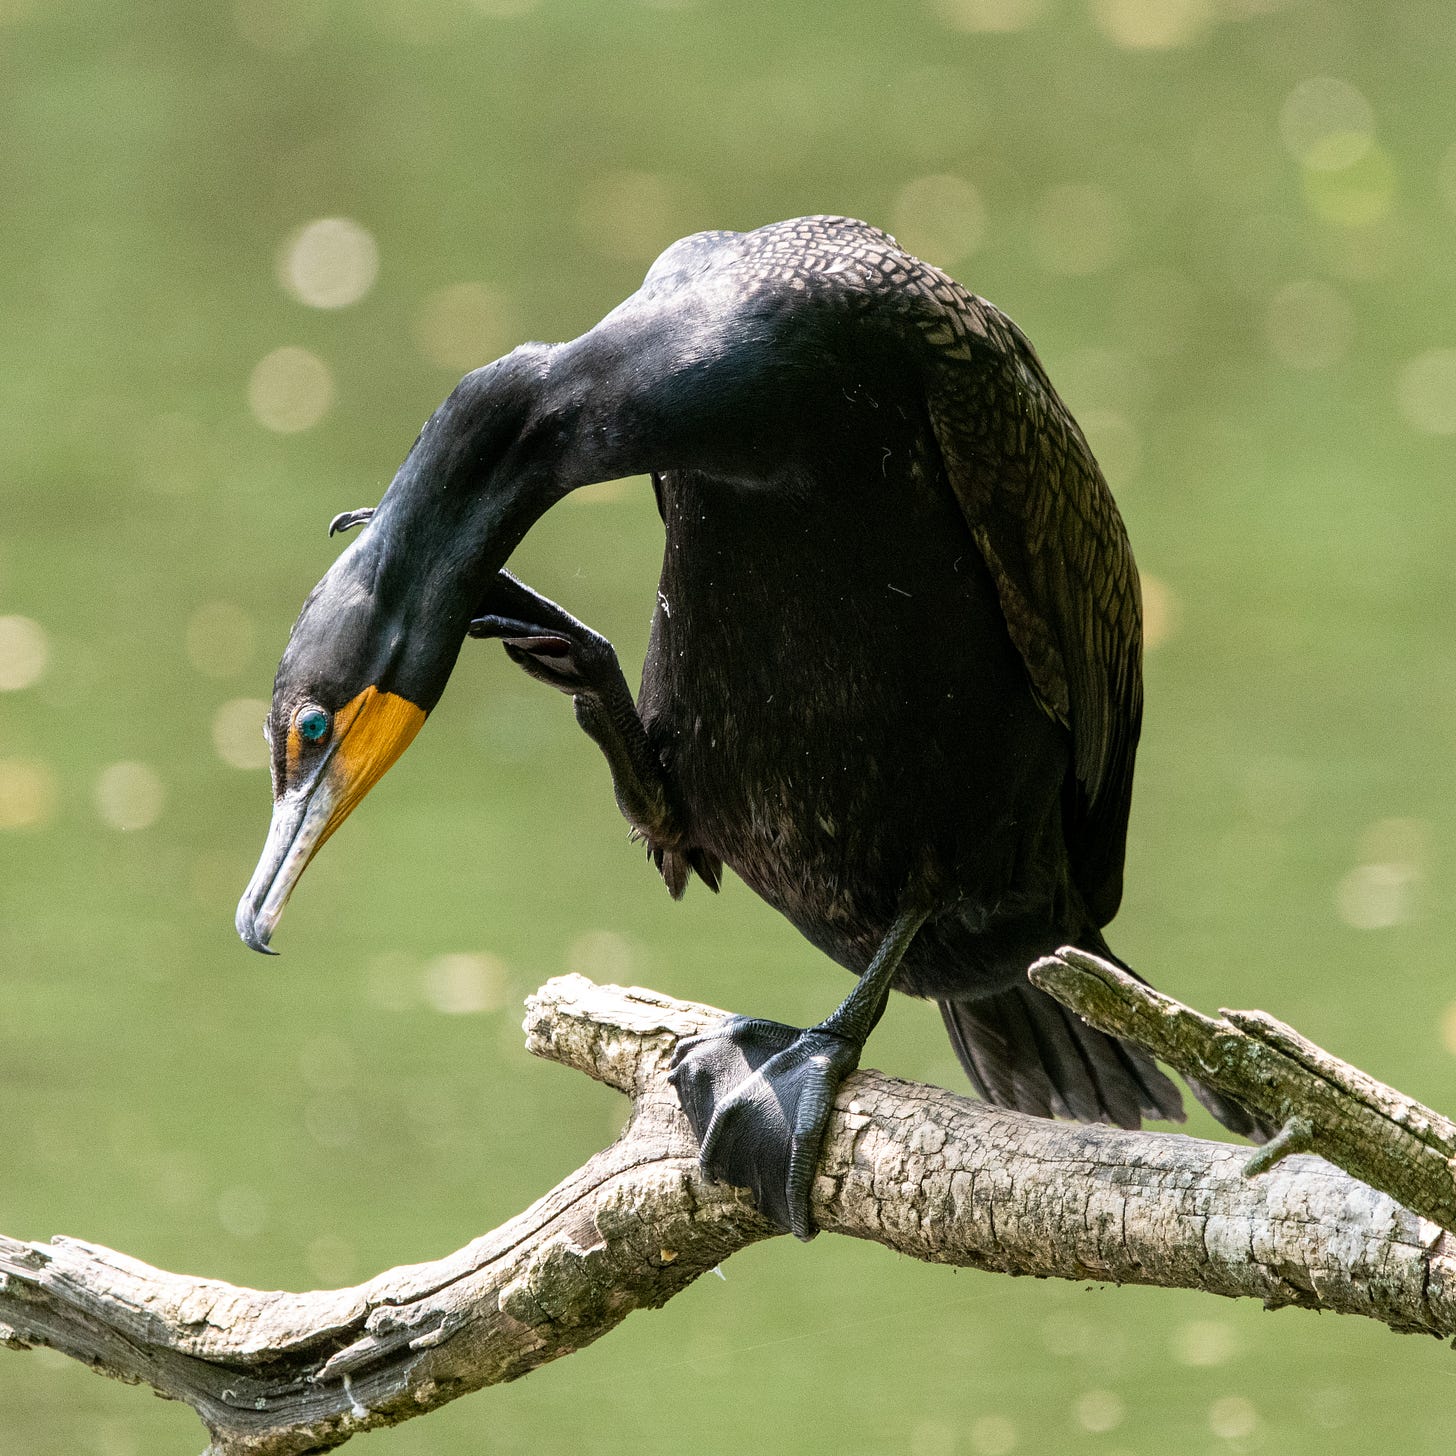 A double-crested cormorant, tire-rubber black with blue candy eyes, is sitting on a log, raising one webby foot to scratch behind its invisible right ear